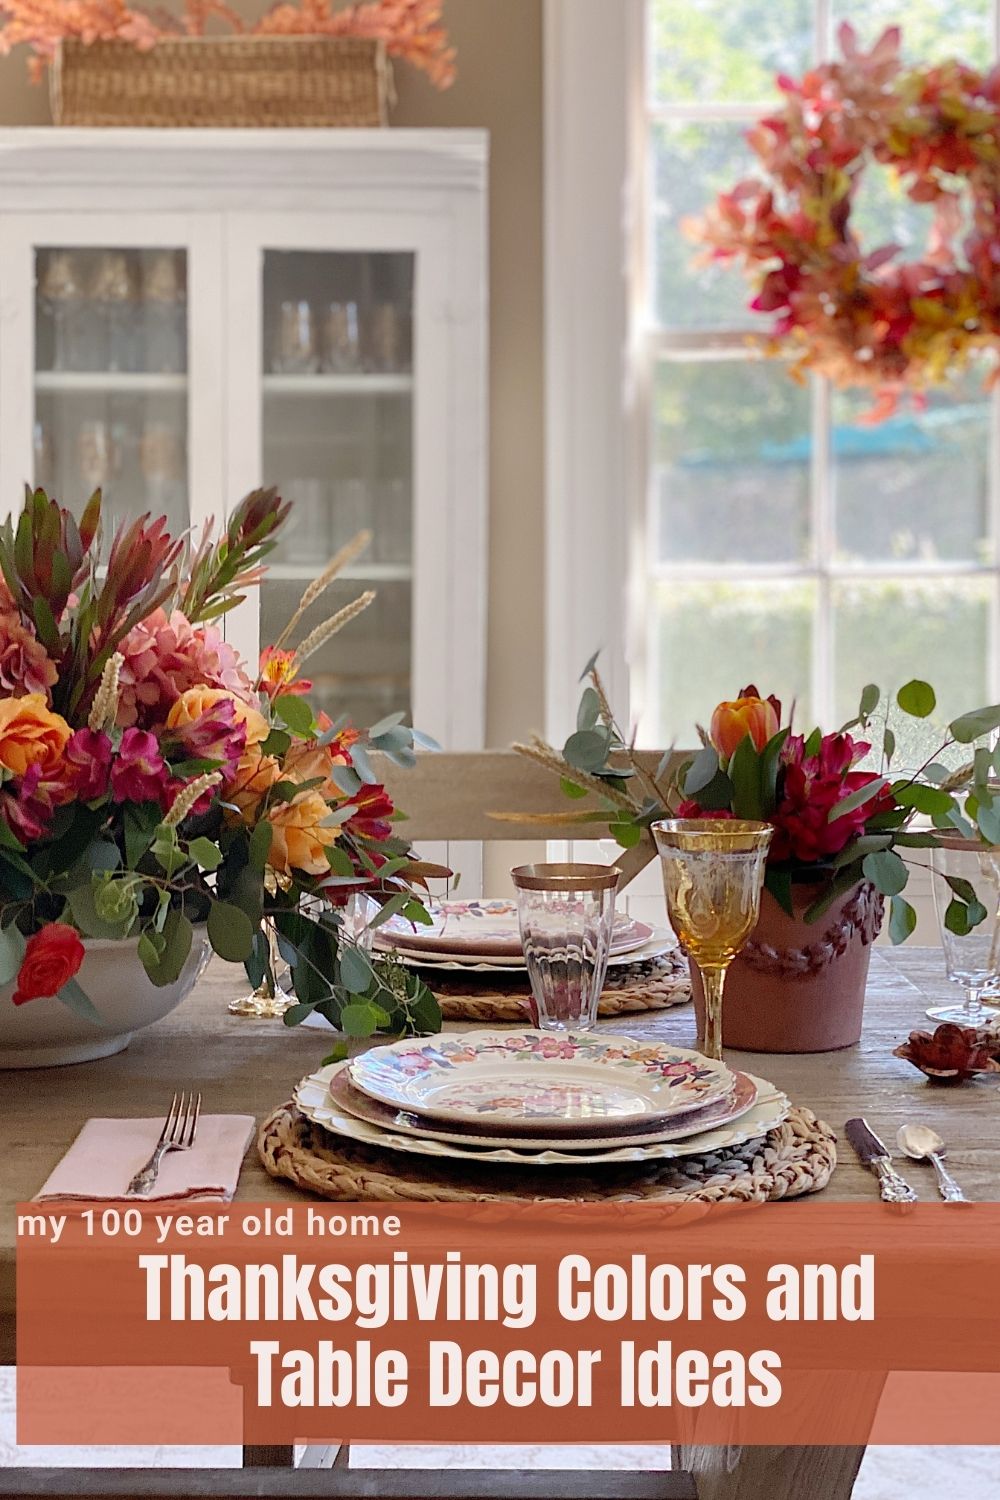 I set this table and I think it is one of my favorite Thanksgiving table decor ideas. I can't wait to share how you can pick Thanksgiving colors for your table!